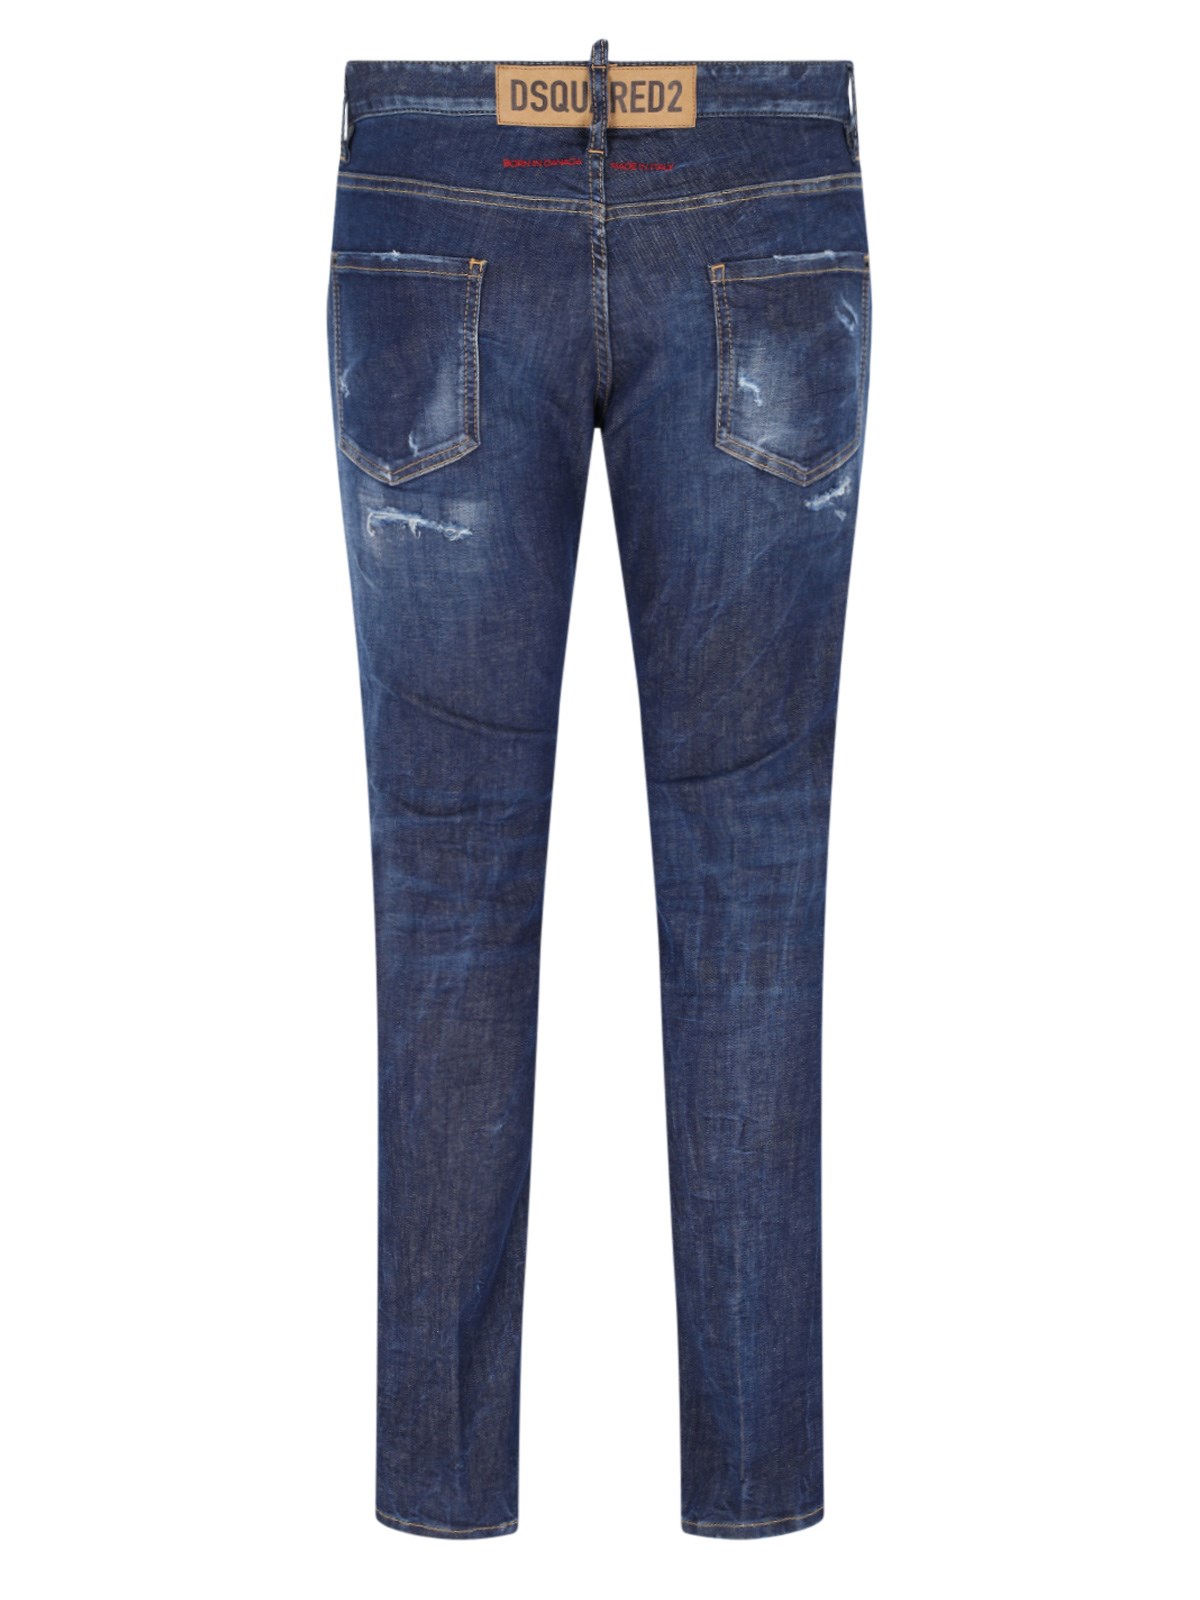 Dsquared2 Slim jeans available on SUGAR - 140289